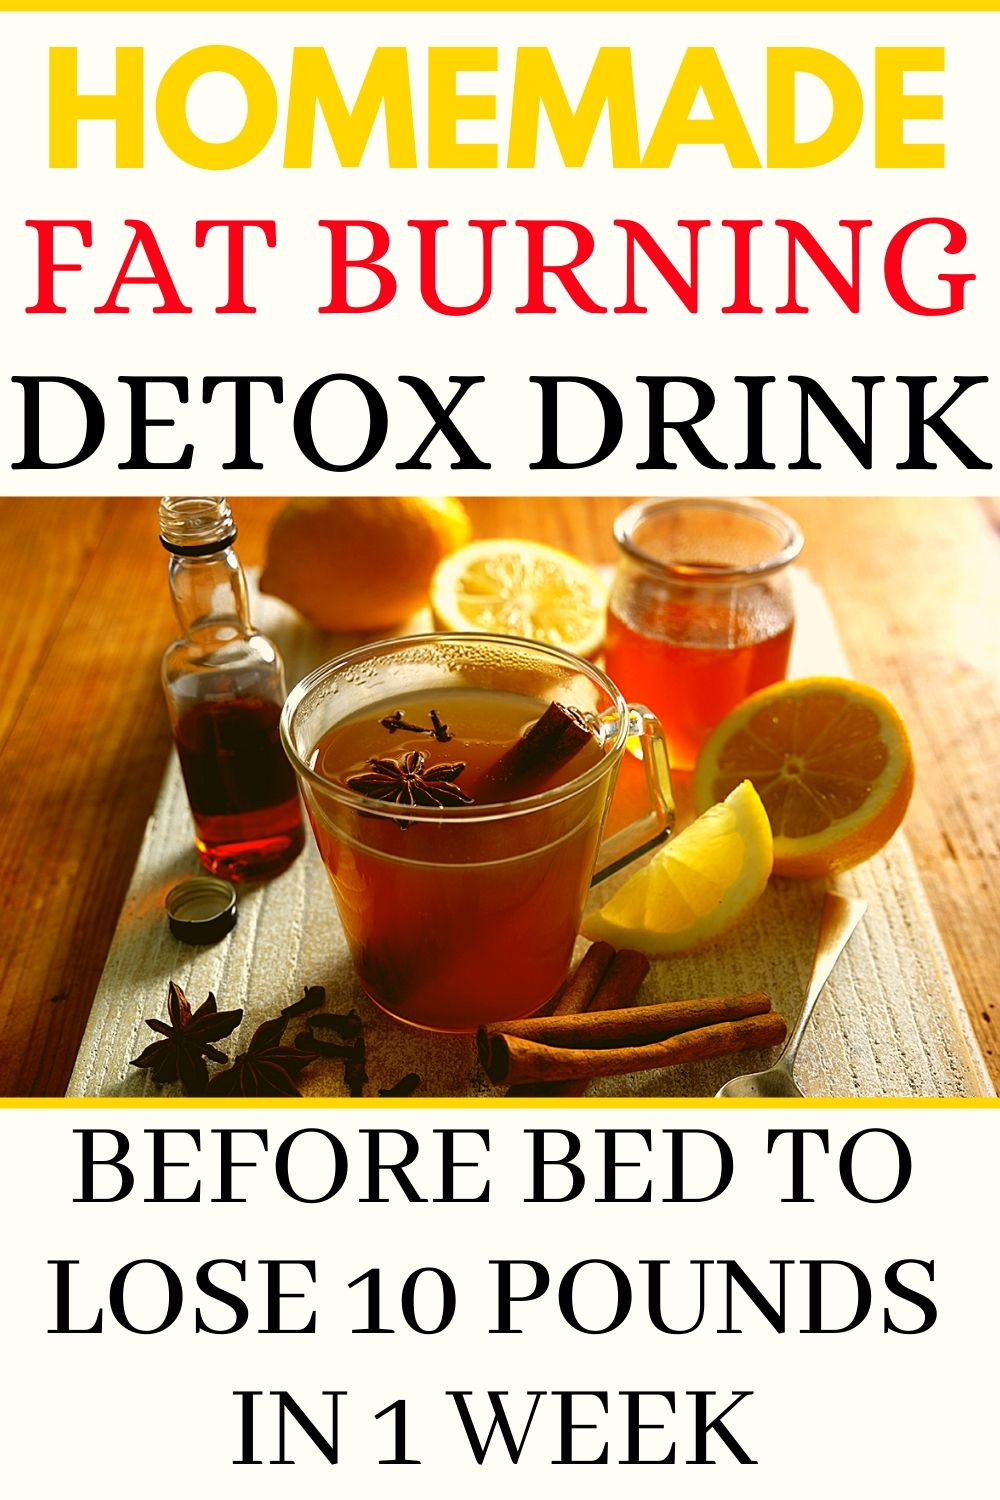 Before Bed Detox Drink Burn Belly Fat
 Fat Burning Detox Drink Before Bed To Lose 10 Pounds In 1